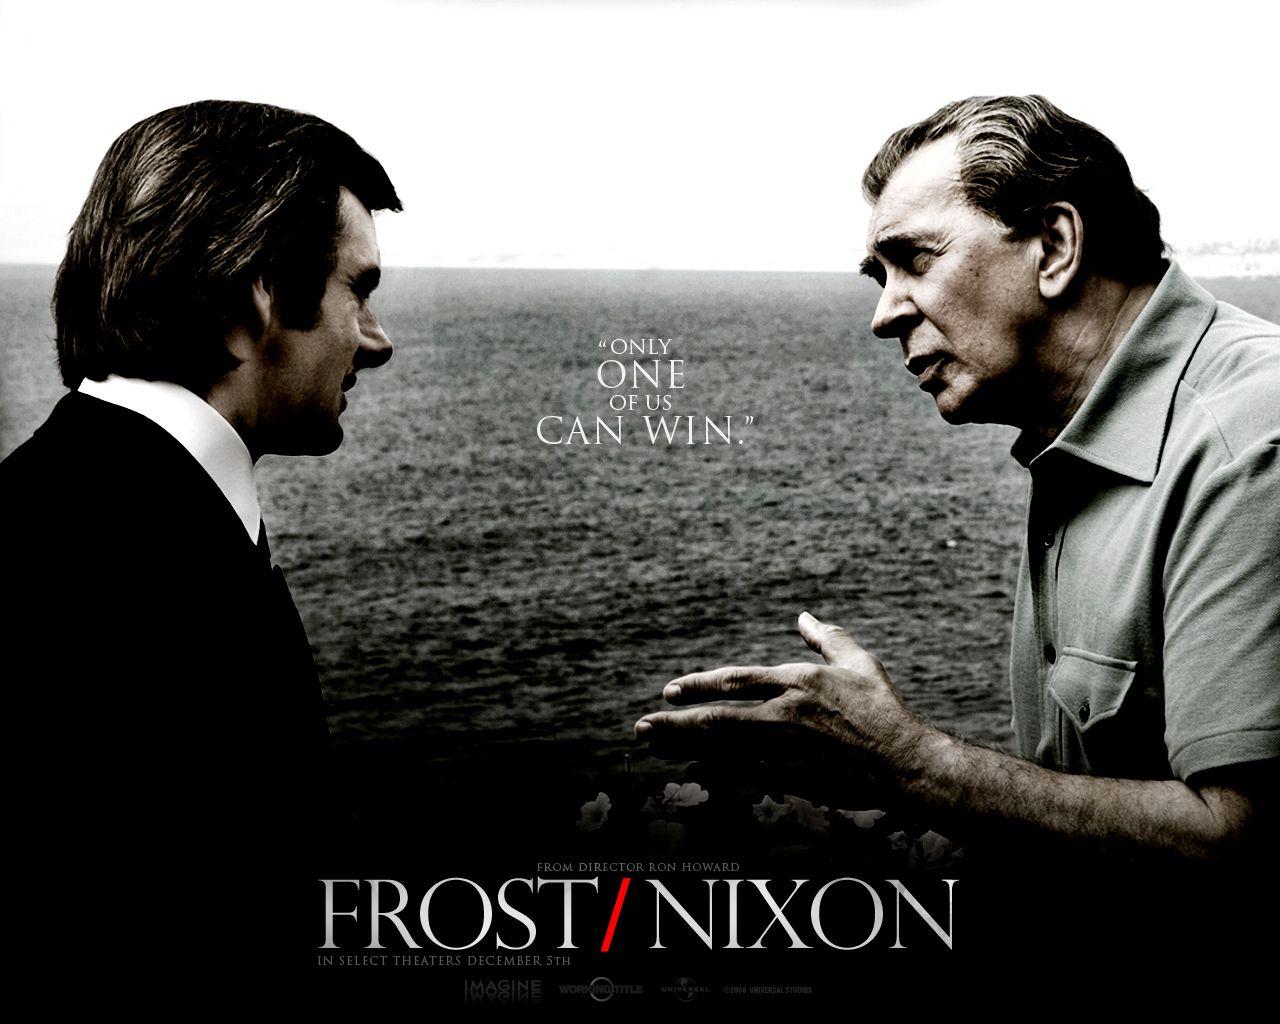 Frost Nixon 010. Free Desktop Wallpaper for Widescreen, HD and Mobile